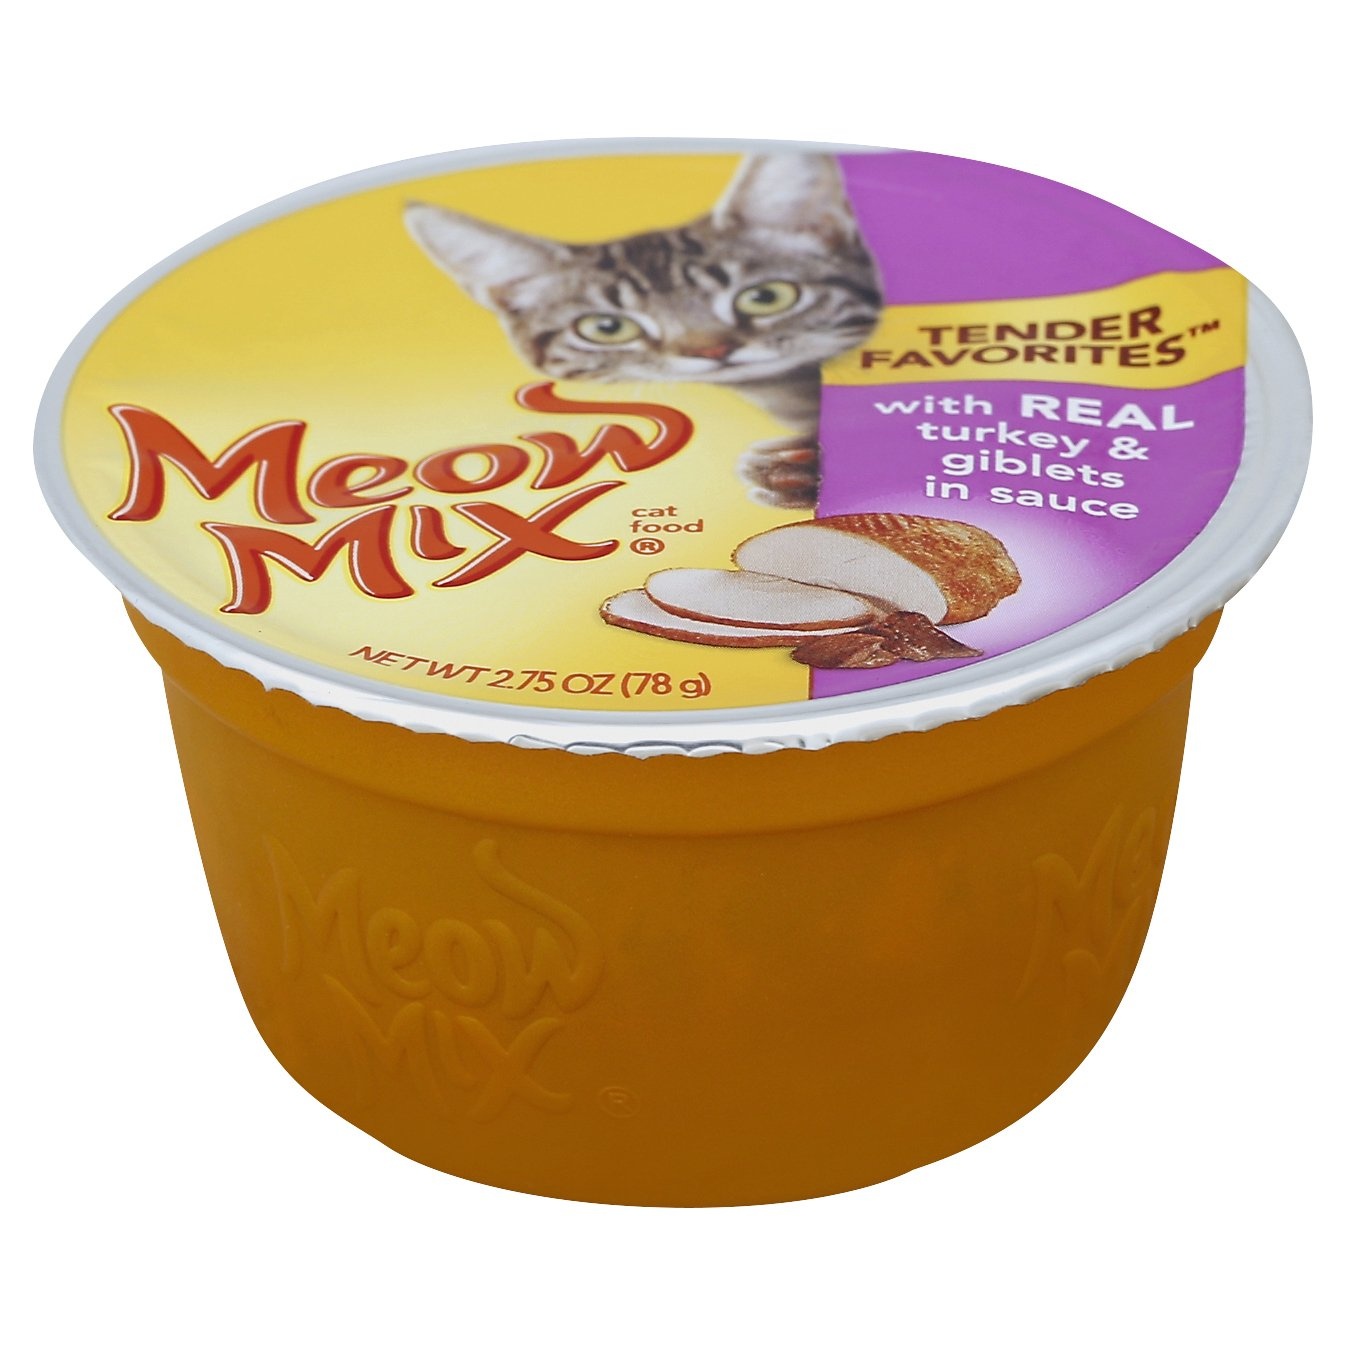 Meow Mix Tender Favorites Tuna & Whole Shrimp in Sauce Wet Cat Food 2